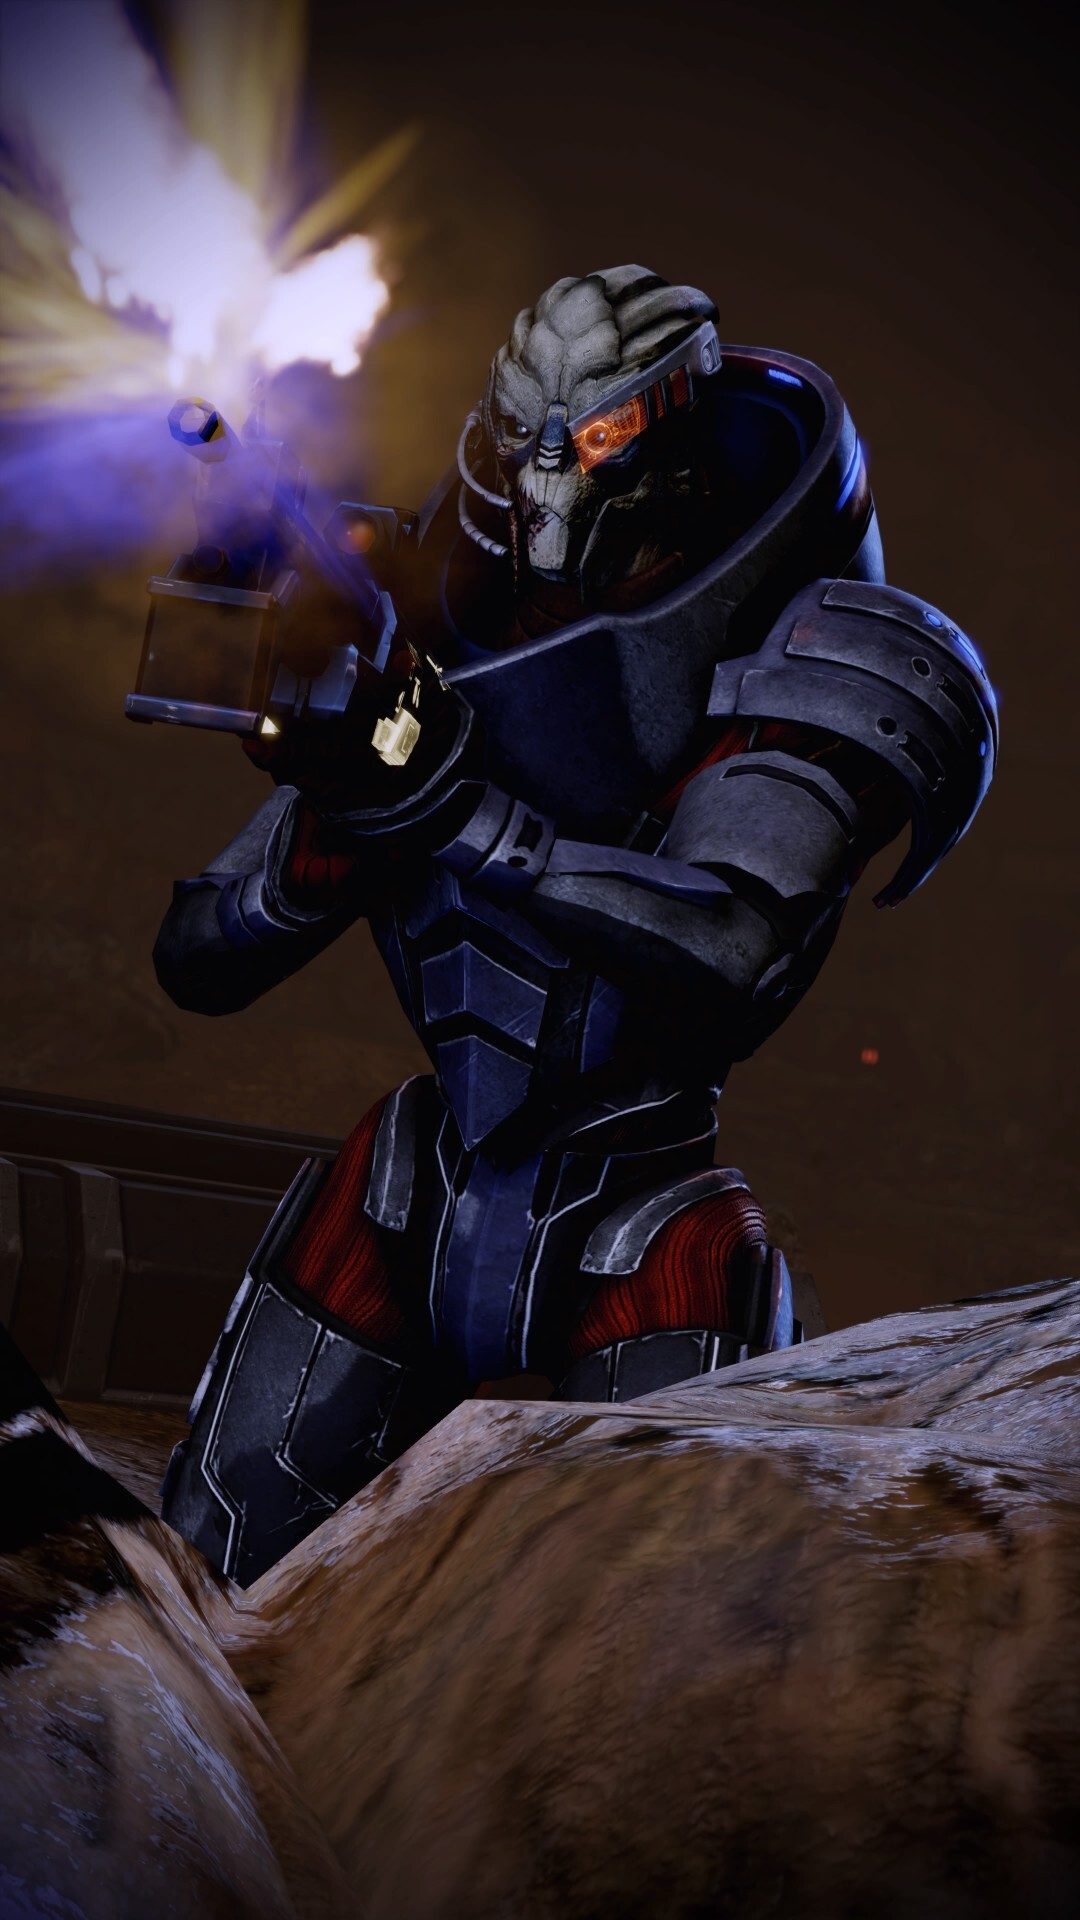 Garrus Vakarian: Sniping at the Collector Base, Suicide Mission, The heart of the Milky Way, Mass Effect 2. 1080x1920 Full HD Background.